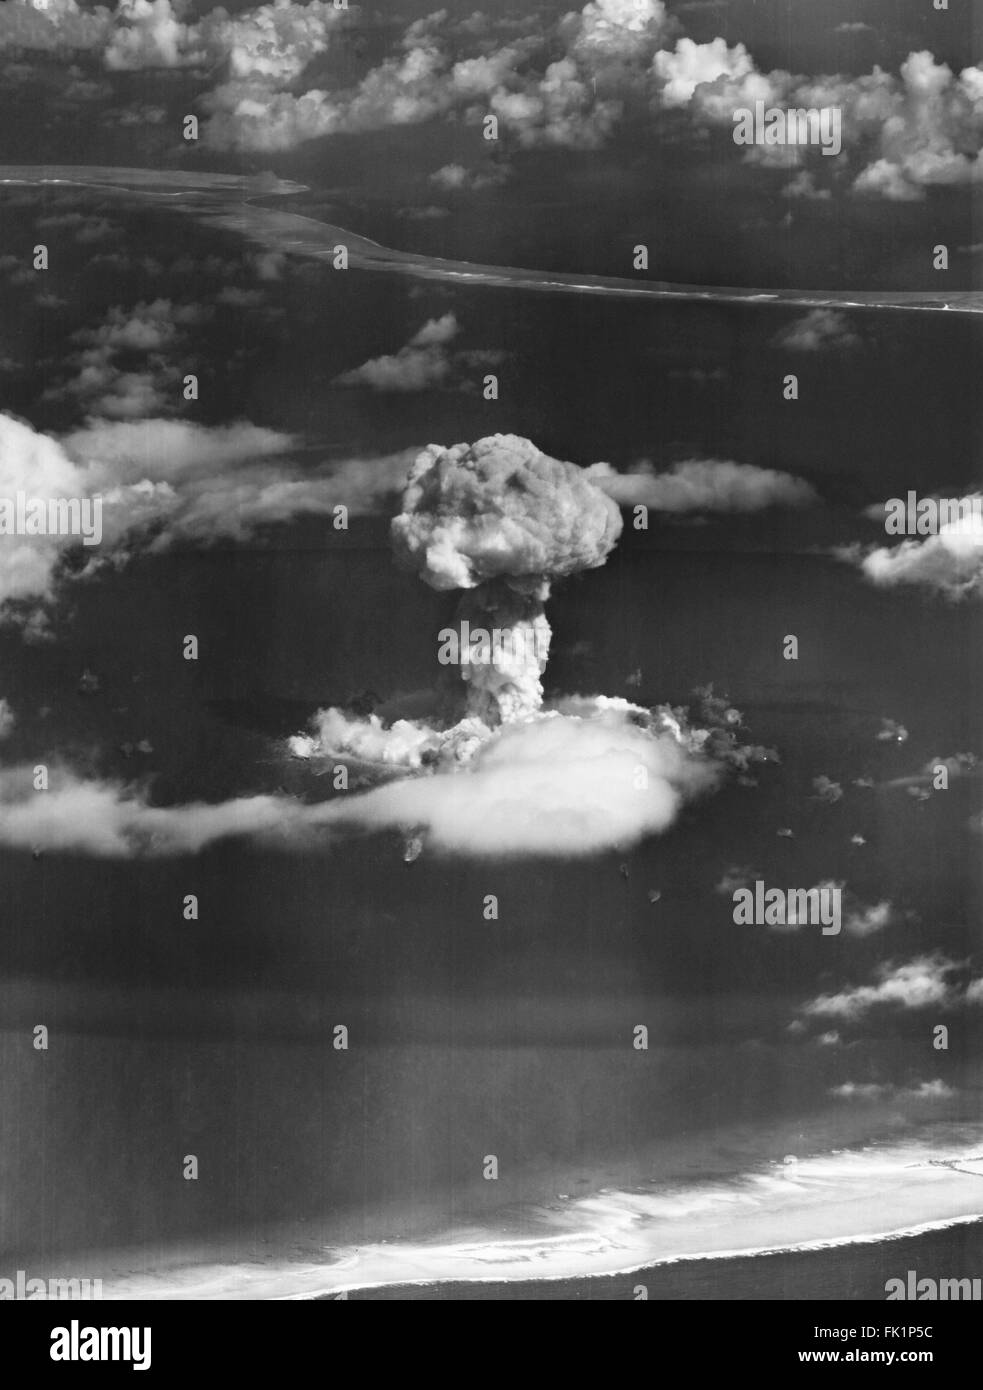 Mushroom cloud from Operation Crossroads nuclear weapons test at Bikini Atoll, Marshall Islands, Pacific Ocean in July 1946. Stock Photo